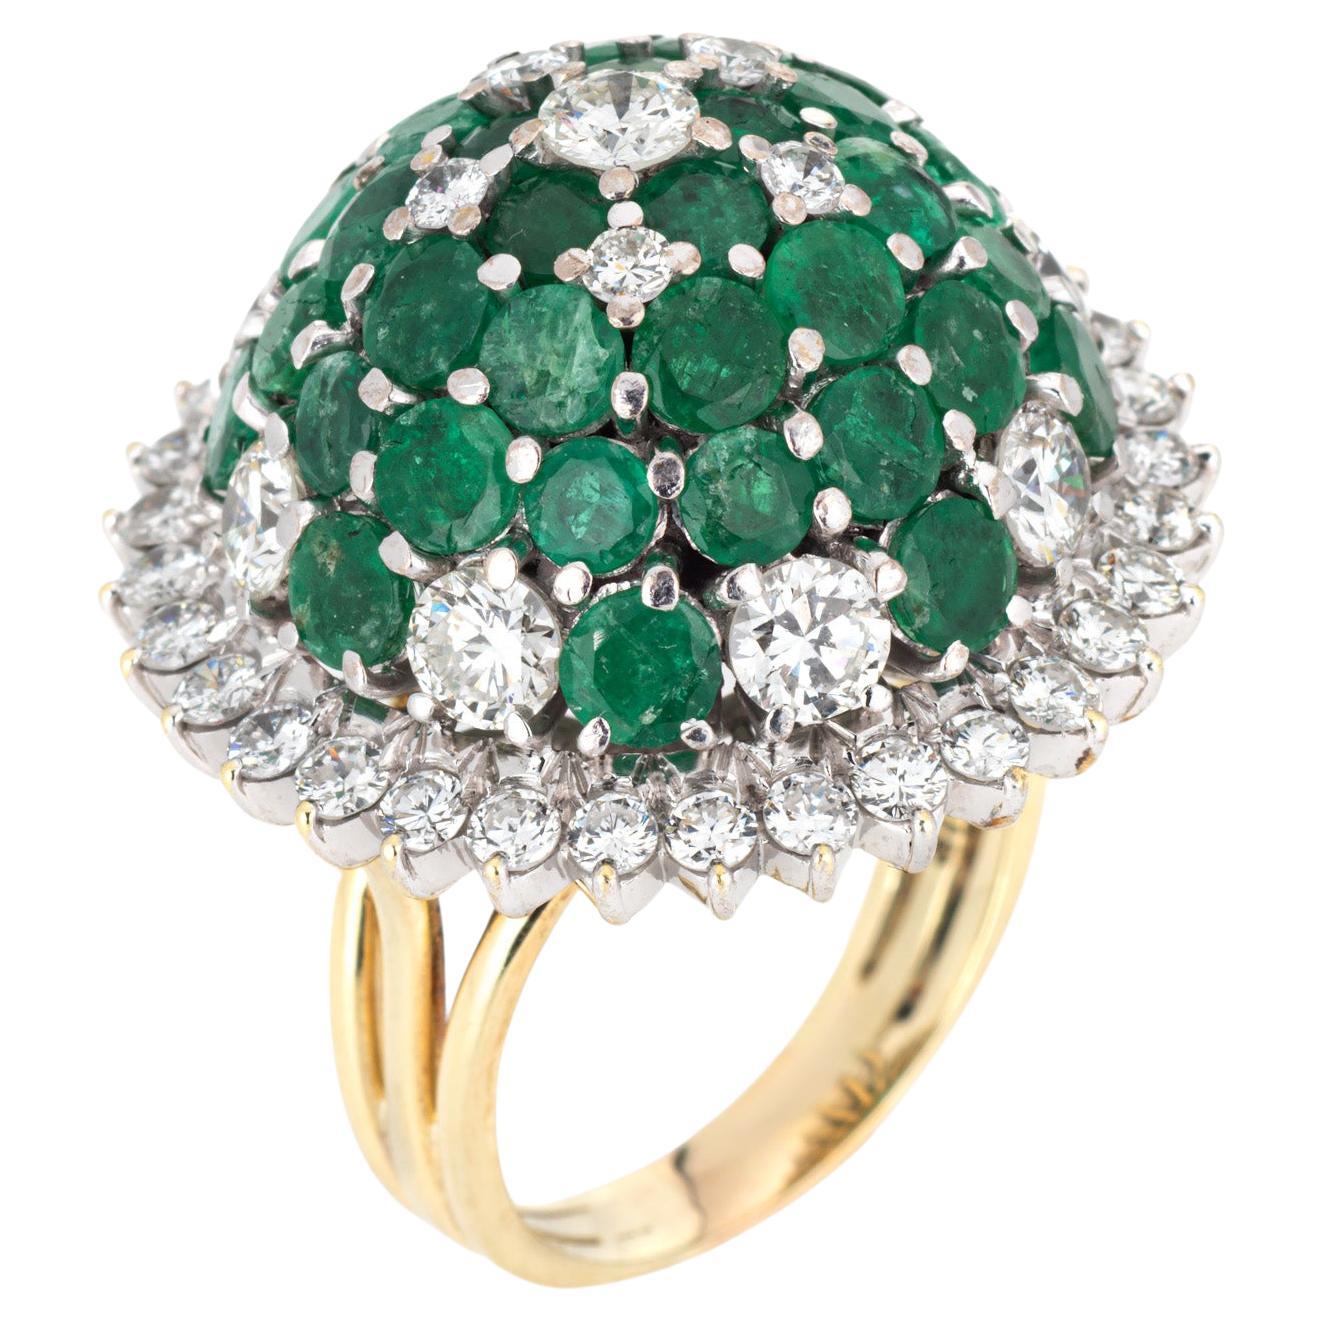 2.50ct Diamond Emerald Dome Ring 60s Vintage 18k Gold Sz 6.75 Cocktail Jewelry